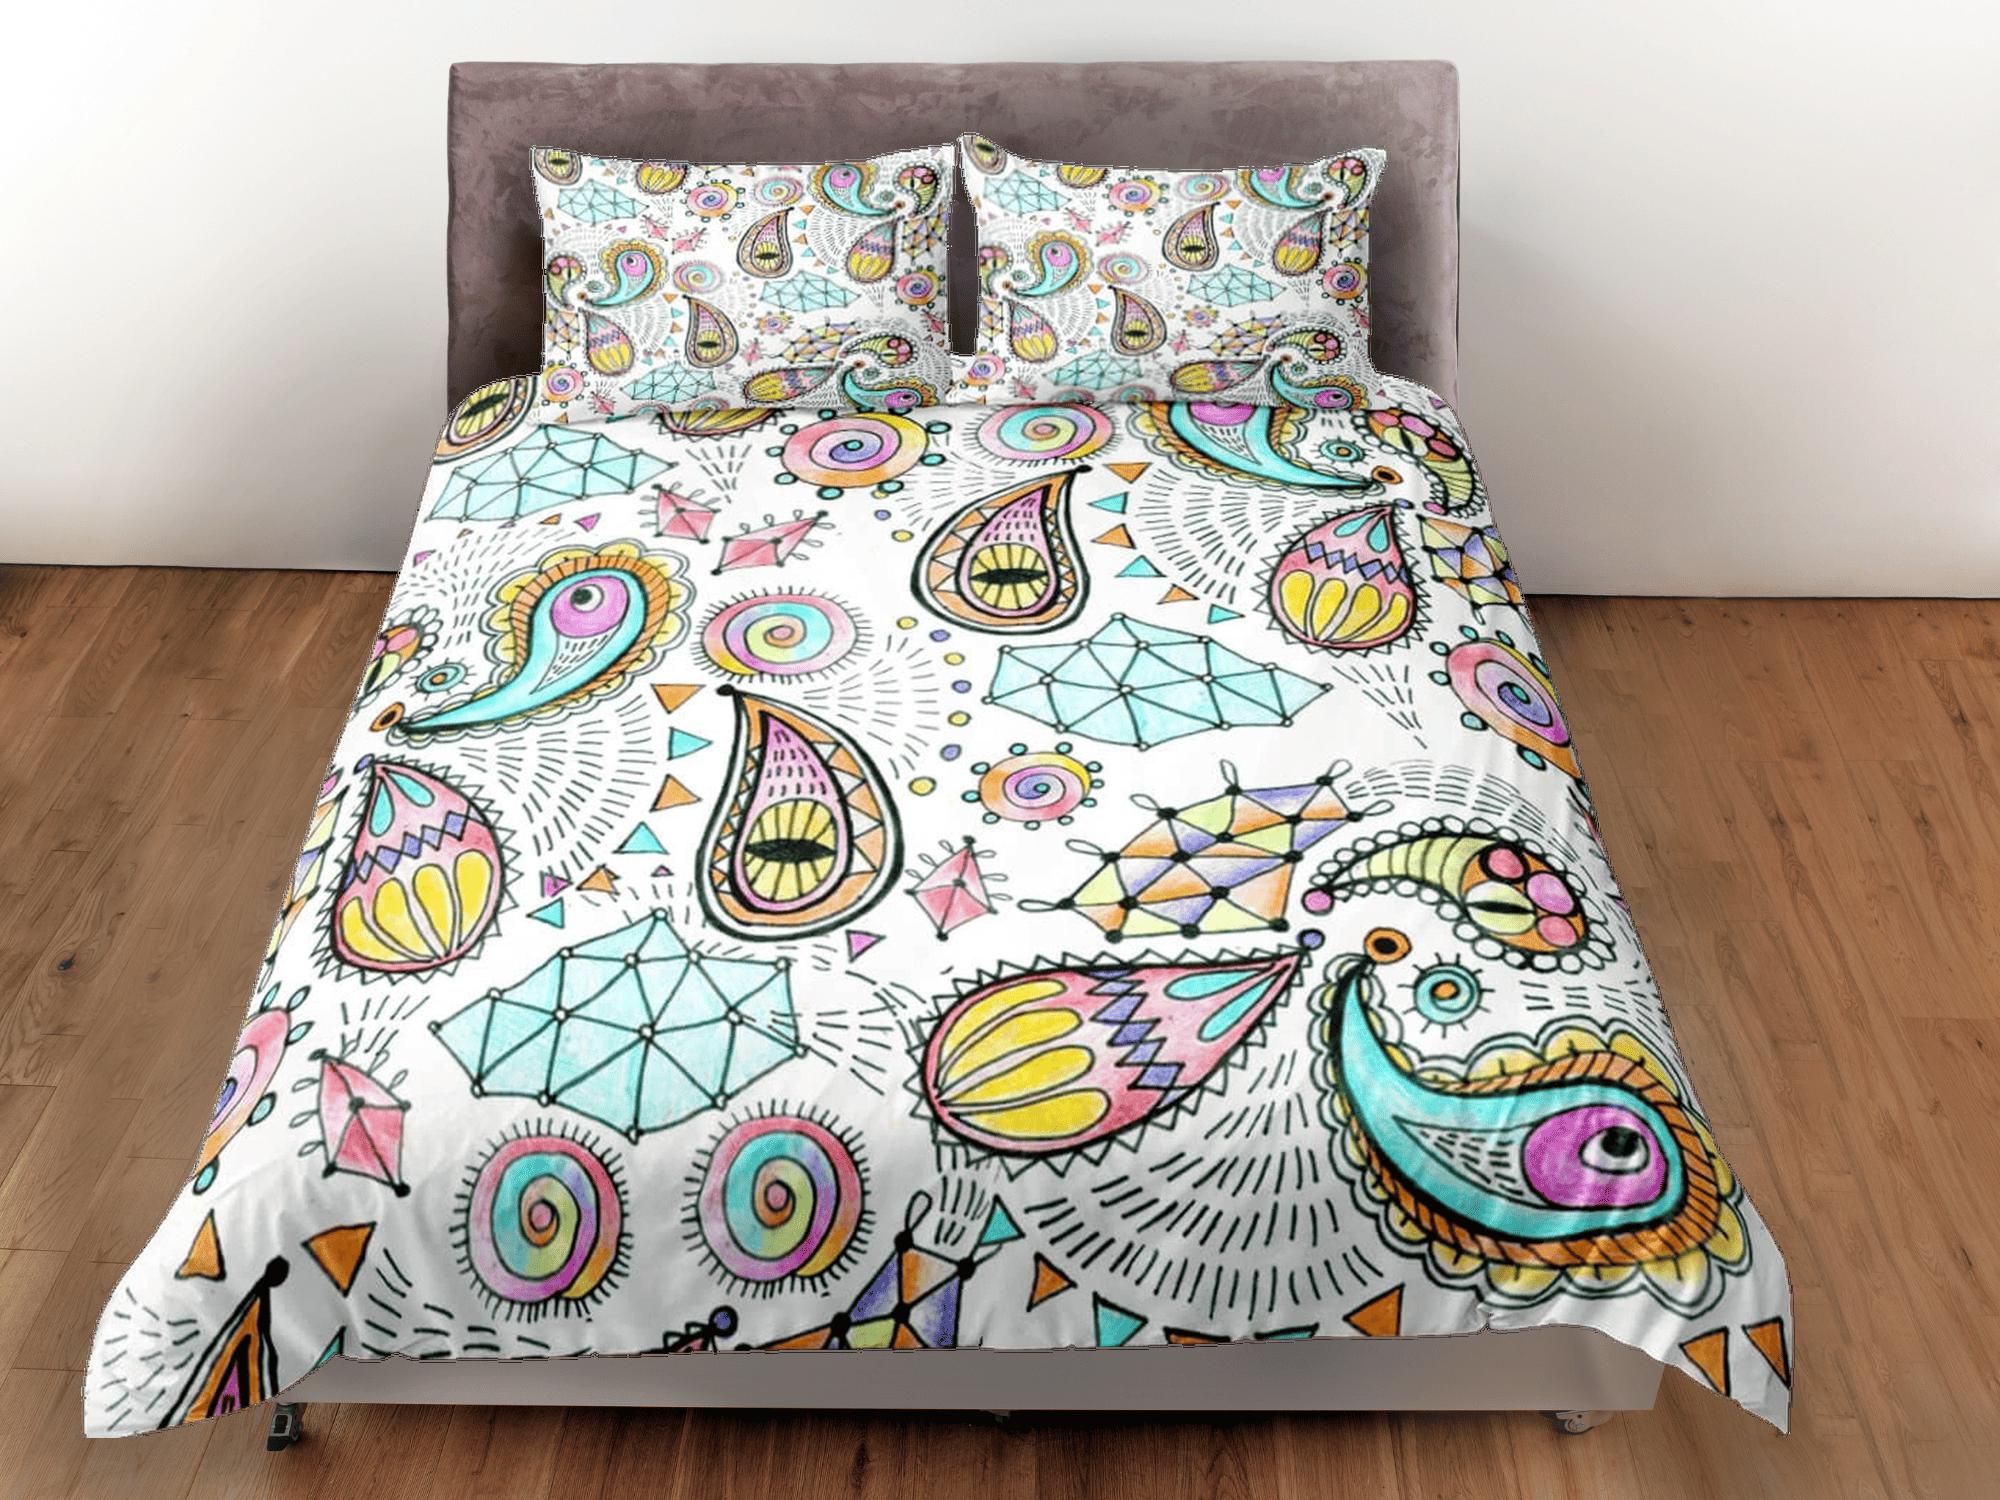 daintyduvet Colorful doodle paisley duvet cover set, aesthetic room decor bedding set full, king, queen size, abstract boho bedspread, luxury bed cover